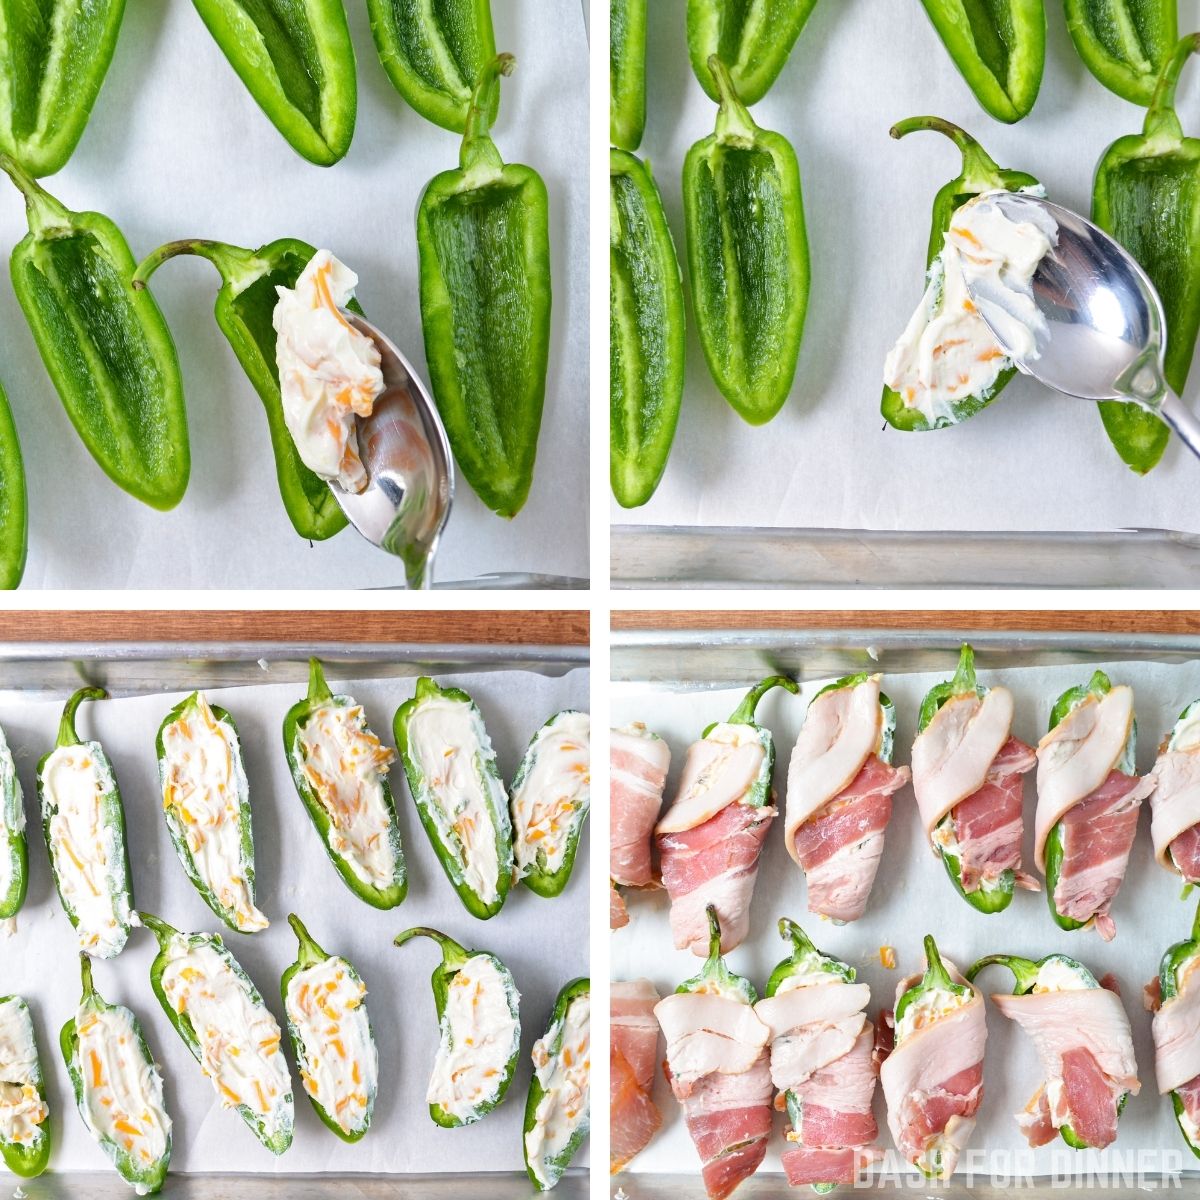 Adding cream cheese to hallowed out jalapeno pepper halves, and wrapping in bacon.